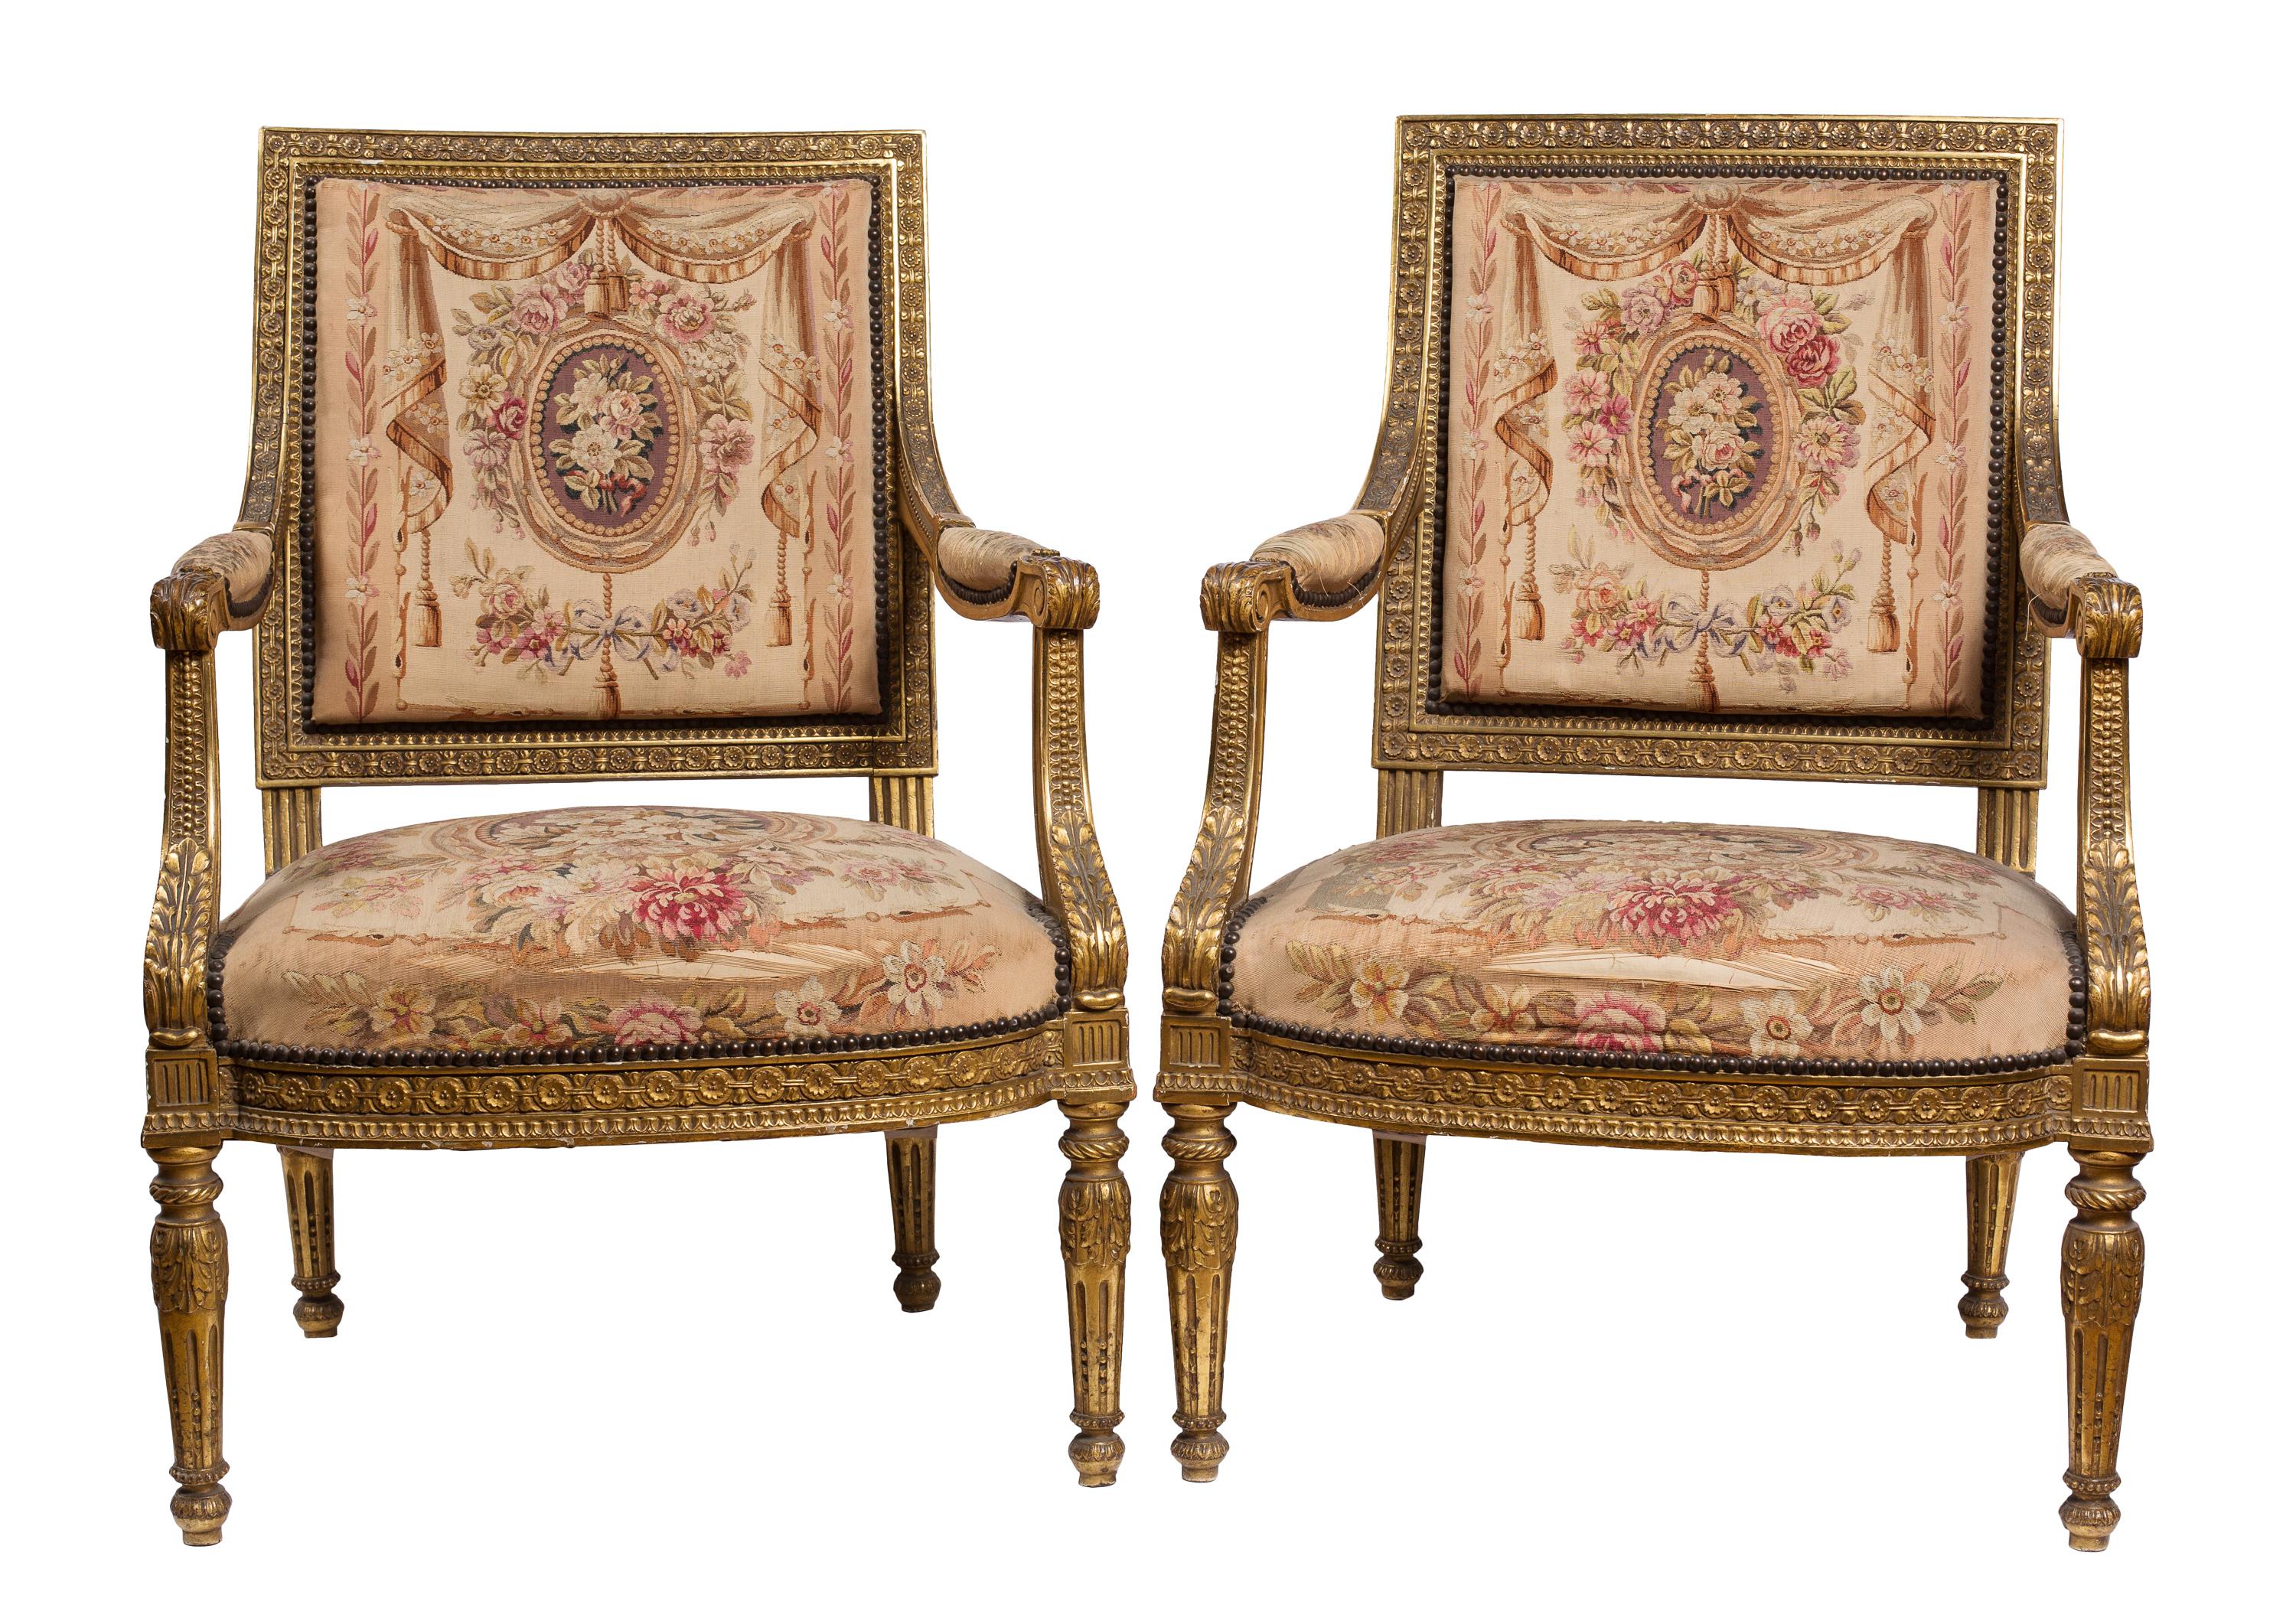 Antique Louis XVI Style 5 Piece Salon Suite, Sofa, 4 Chairs, Aubusson Upholstery In Fair Condition For Sale In Madrid, ES